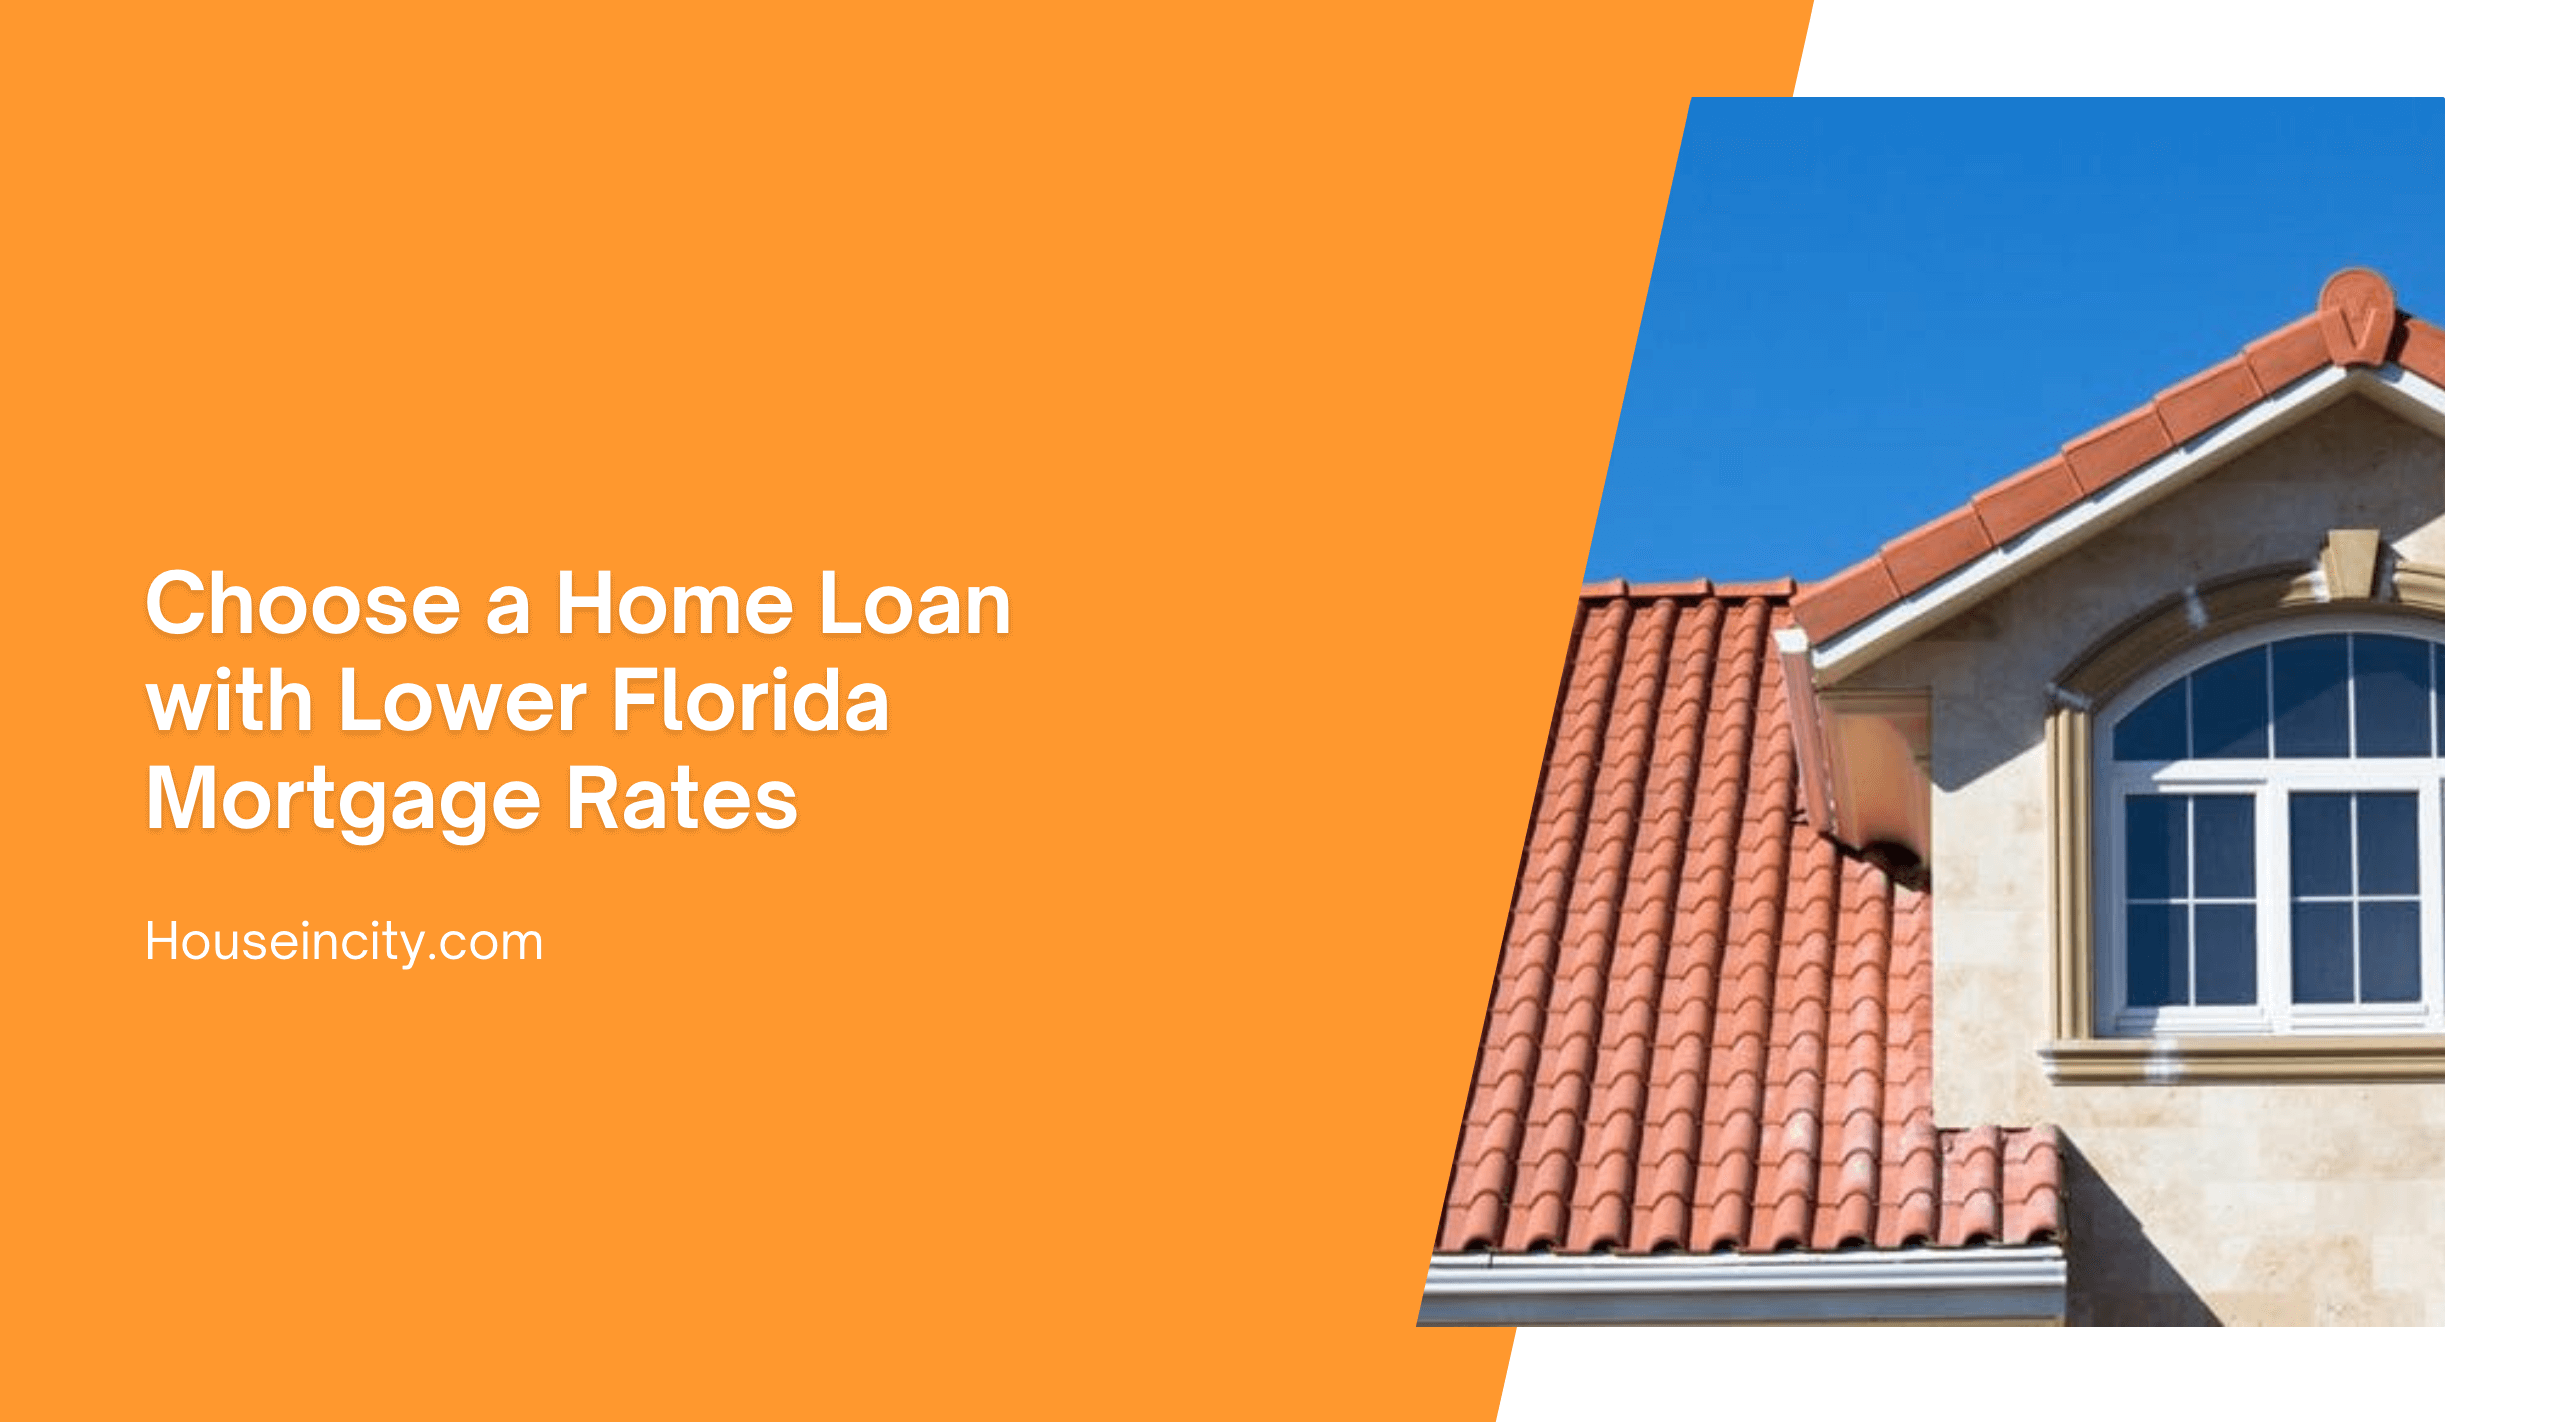 Choose a Home Loan with Lower Florida Mortgage Rates